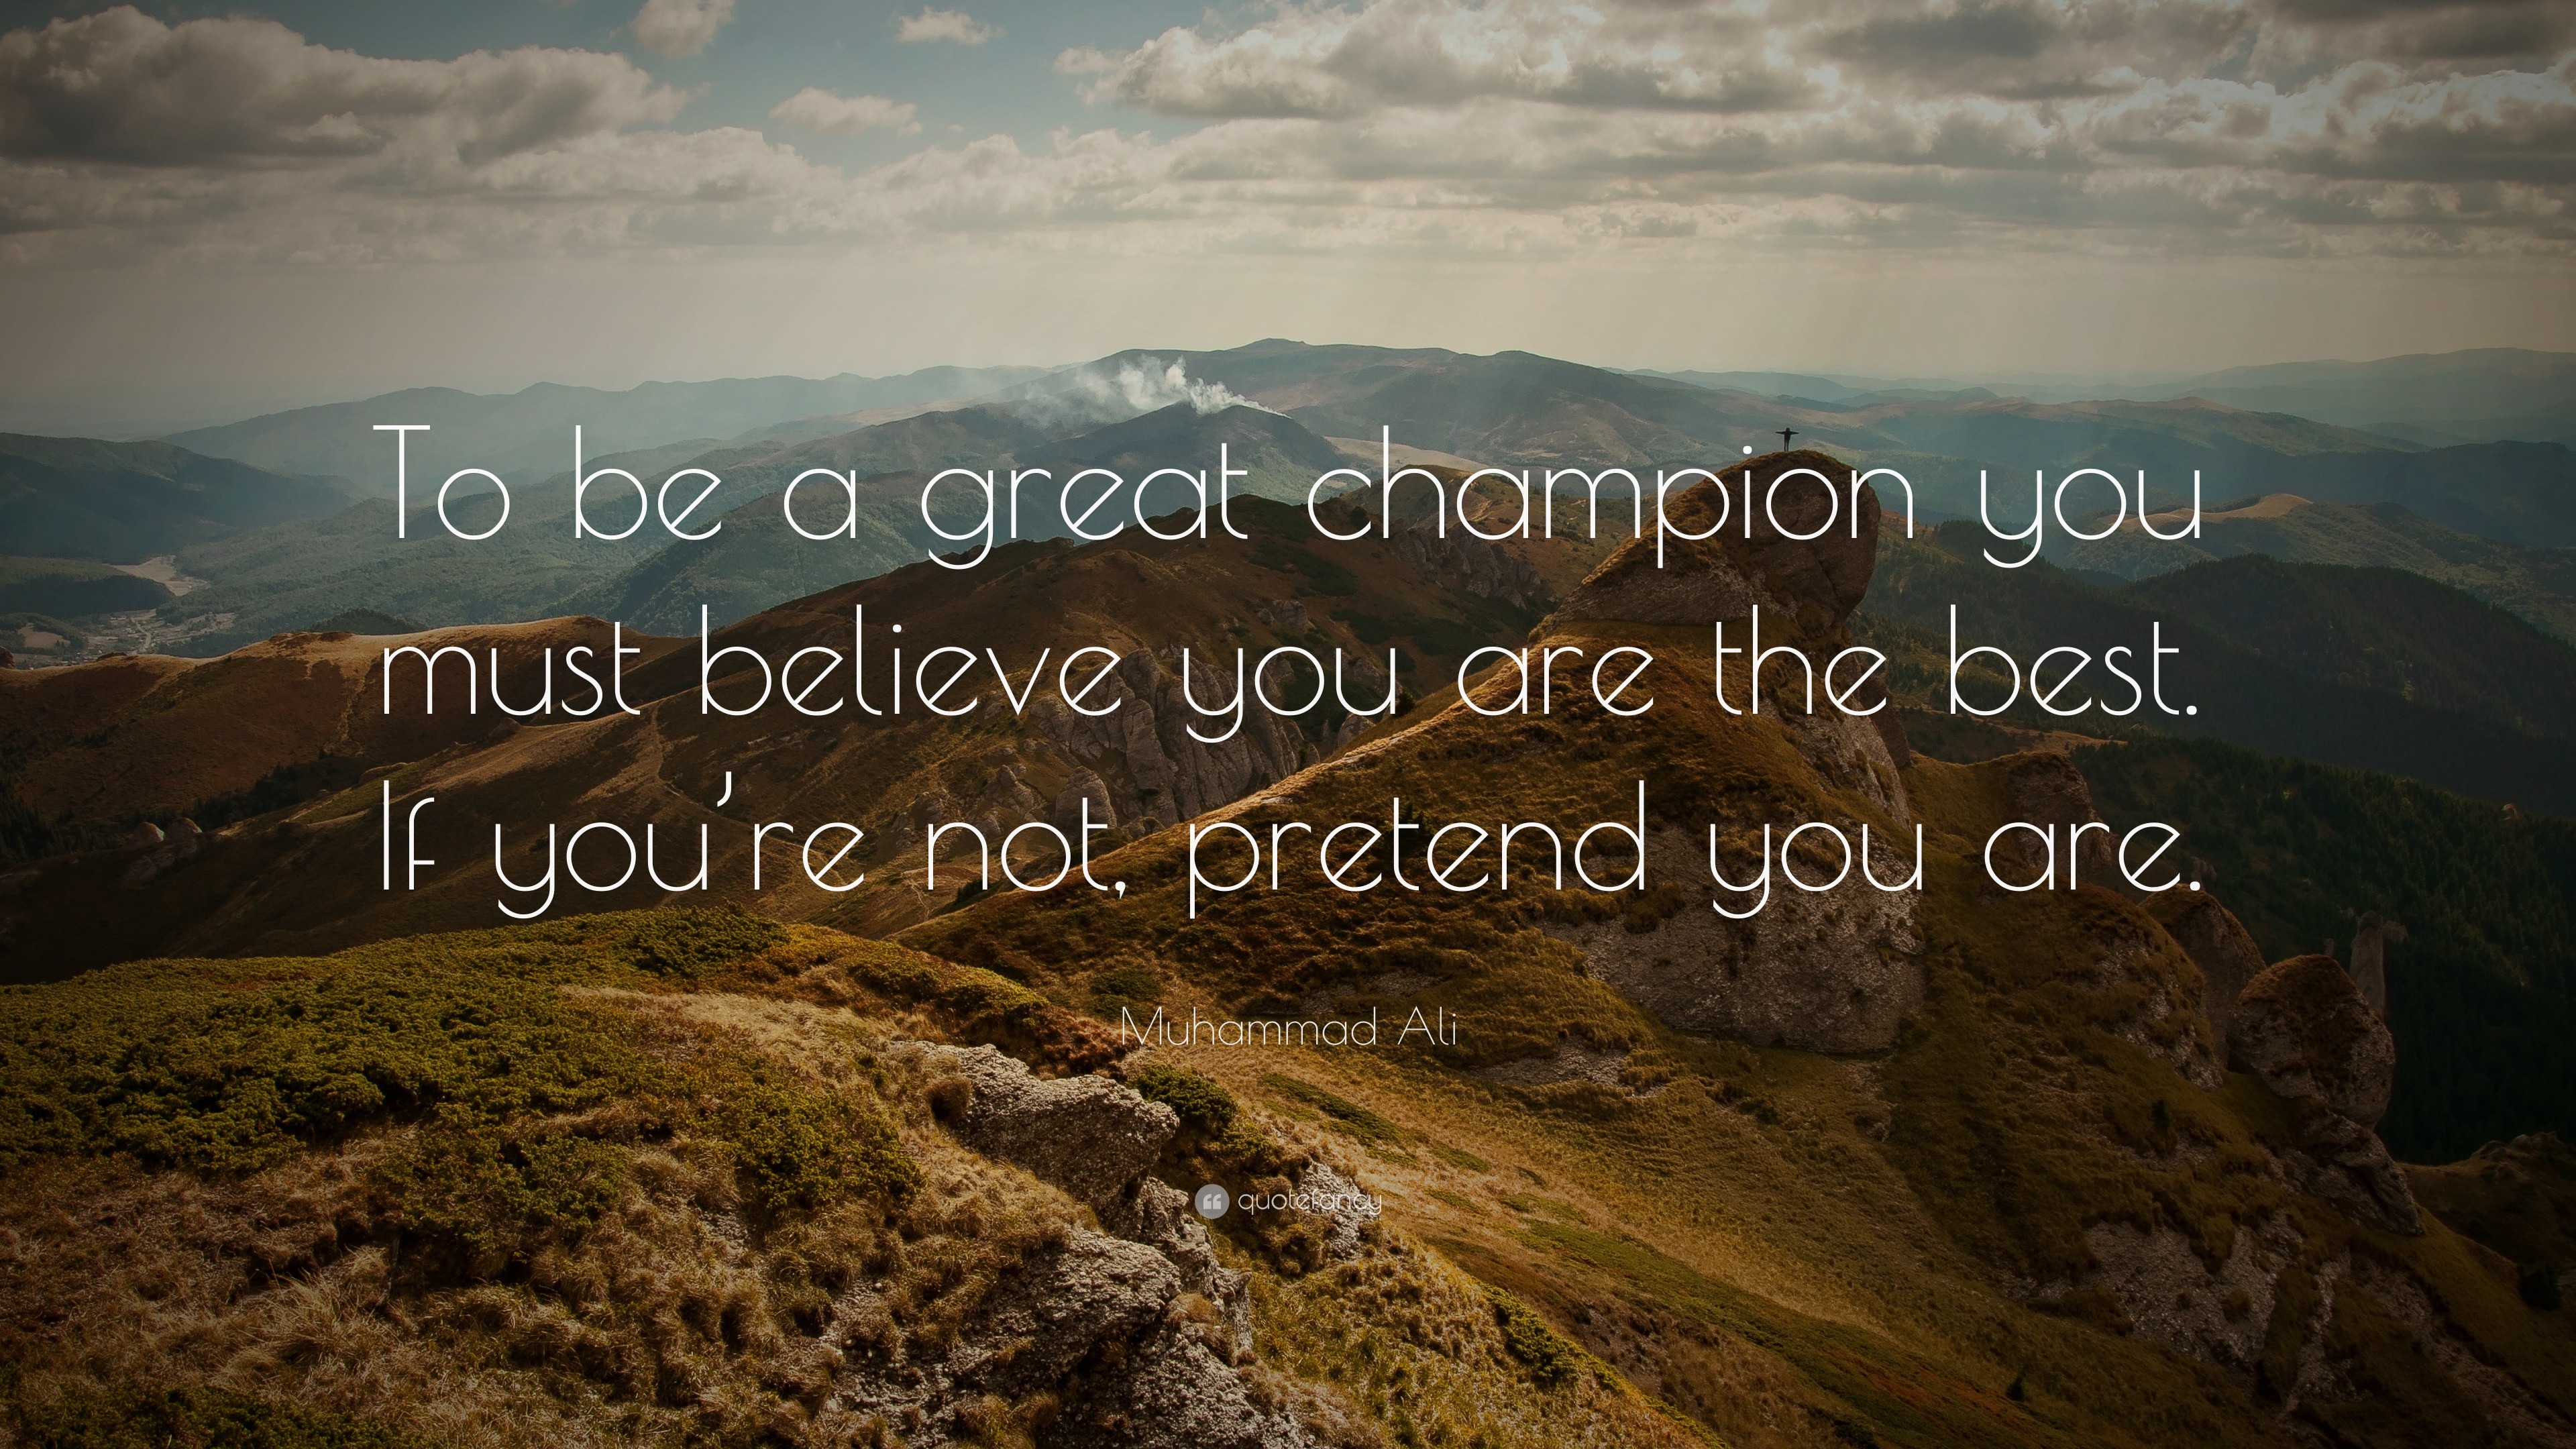 Muhammad Ali Quote: "To be a great champion you must ...